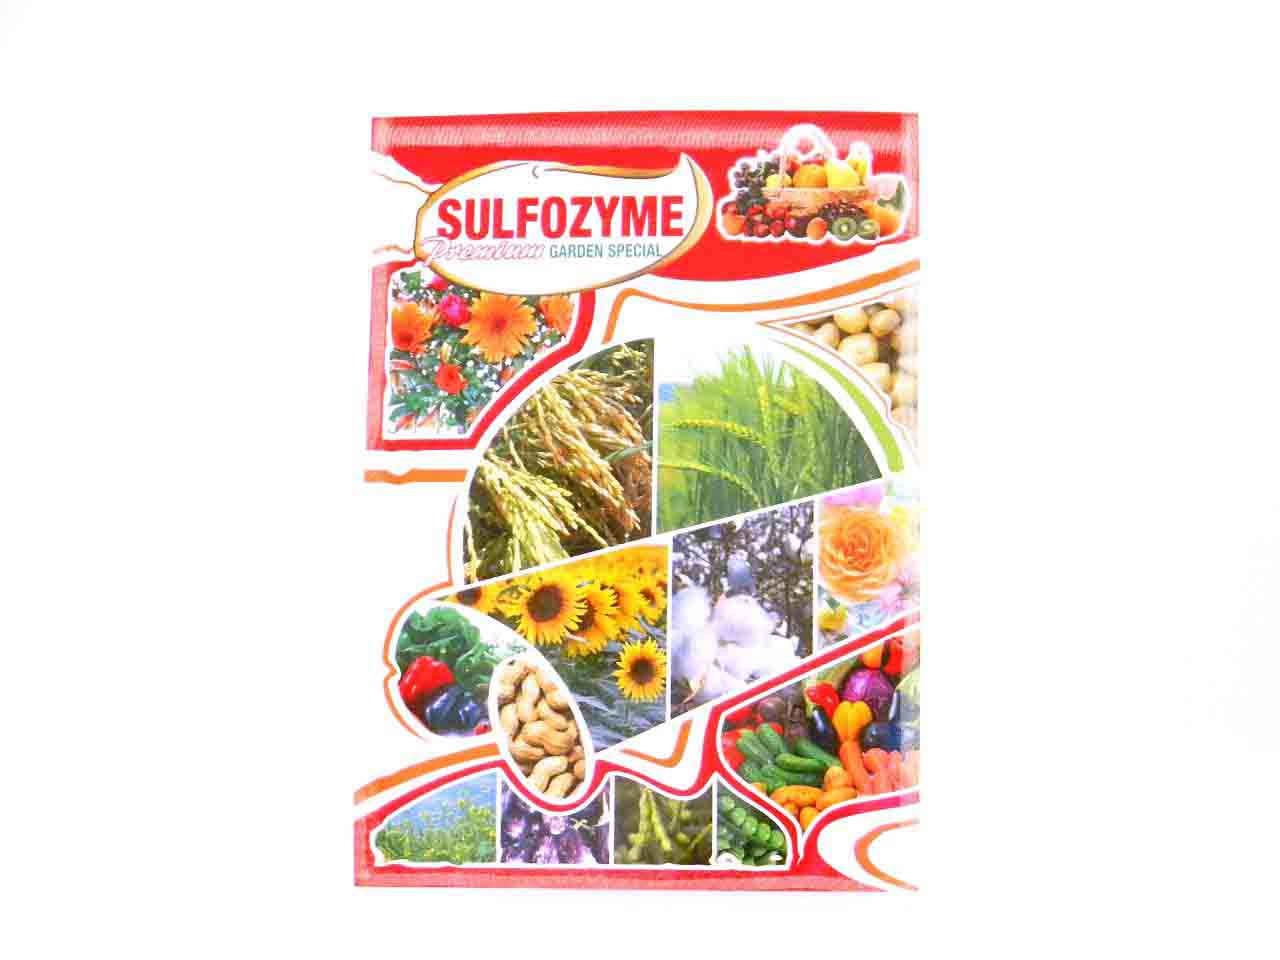 Sulfozyme Garden Special Granules for vegetables, flowers and plants